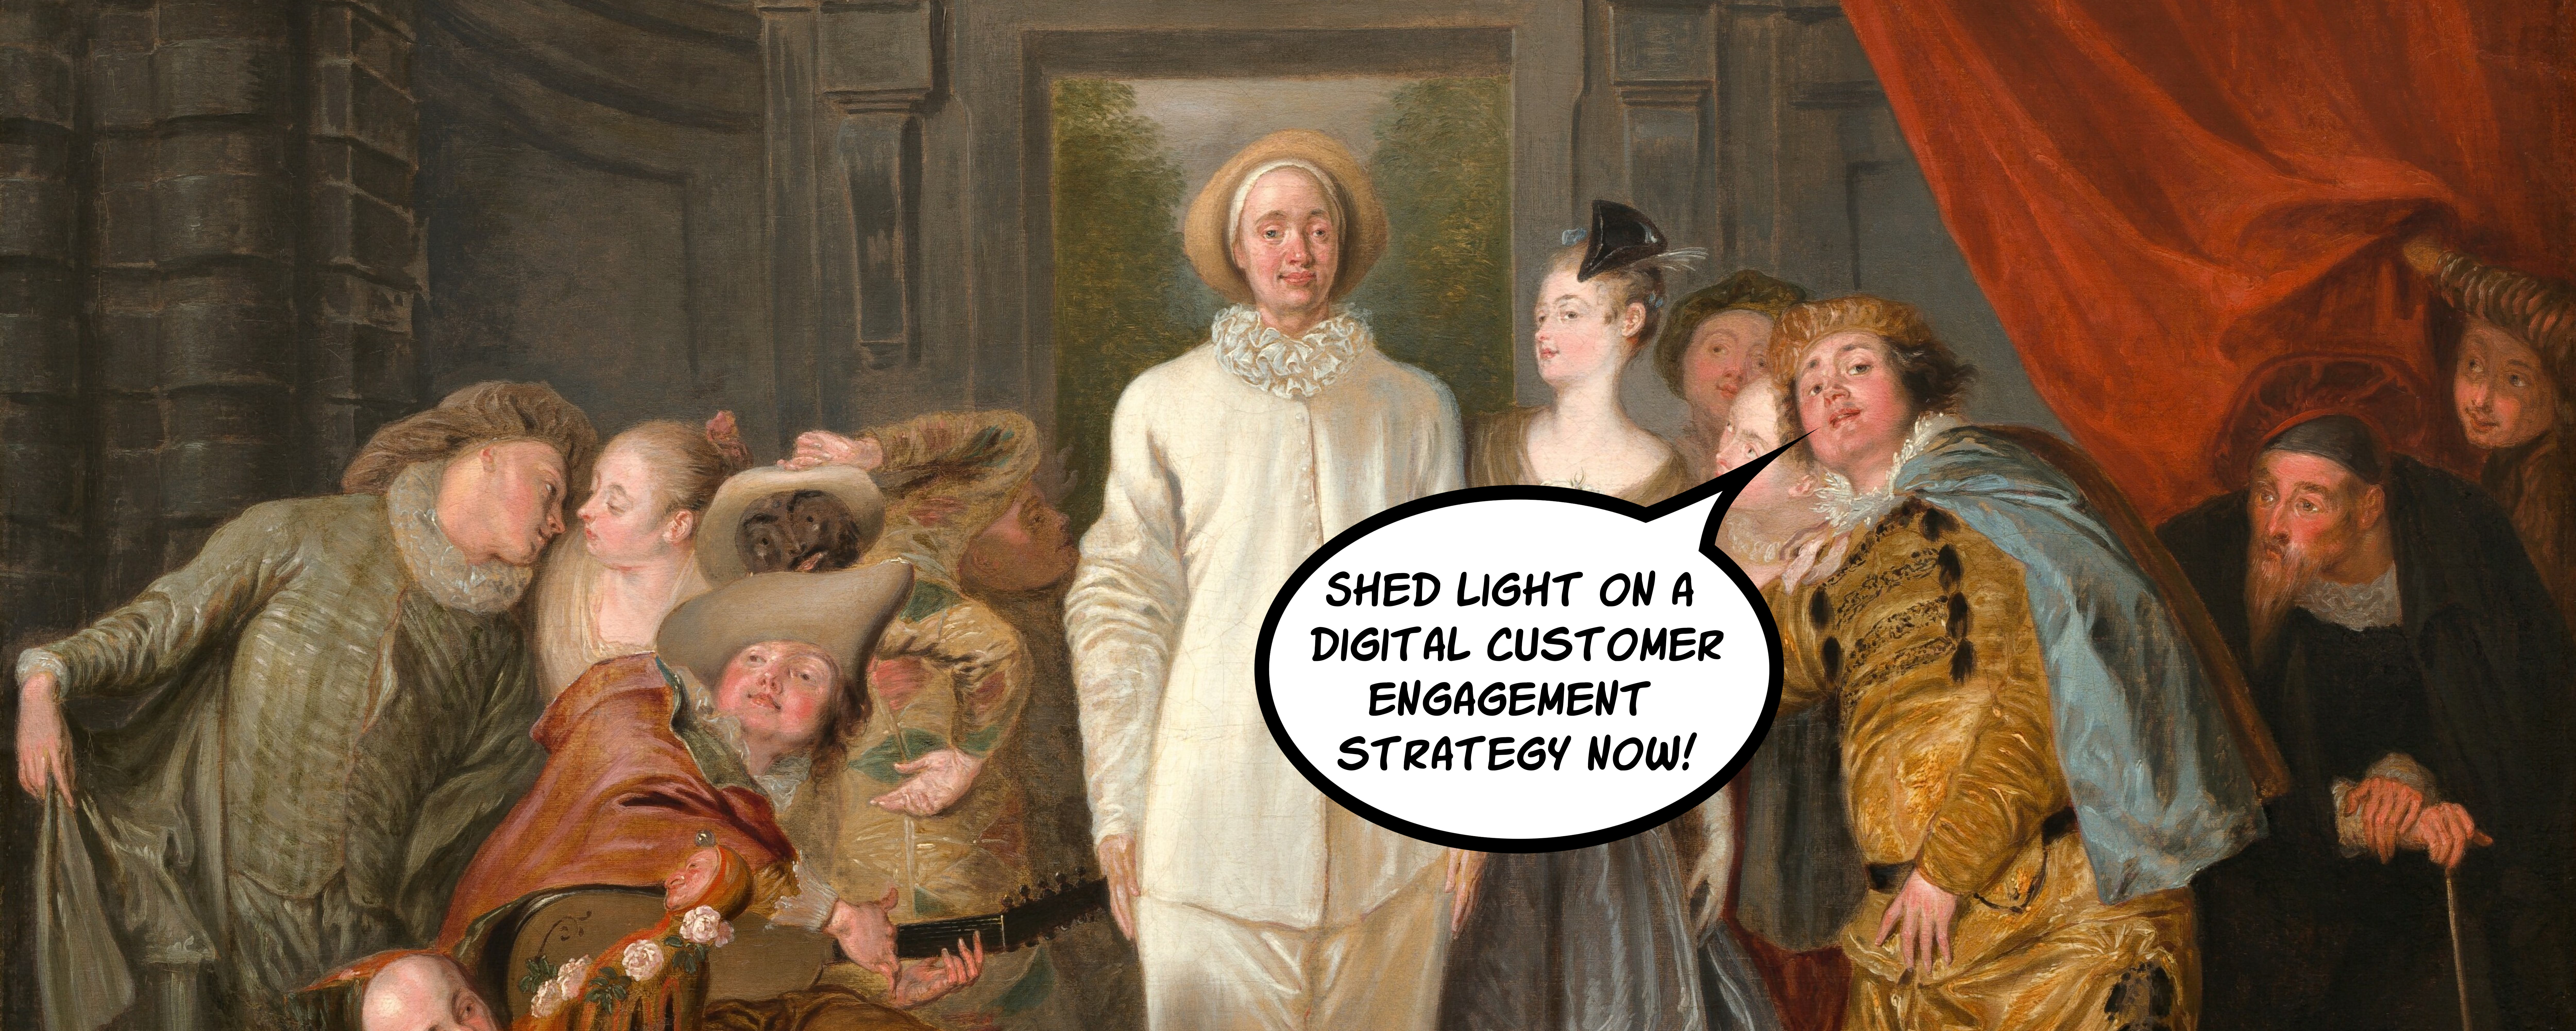 9 Steps to Create a Tailored Digital Customer Engagement Strategy